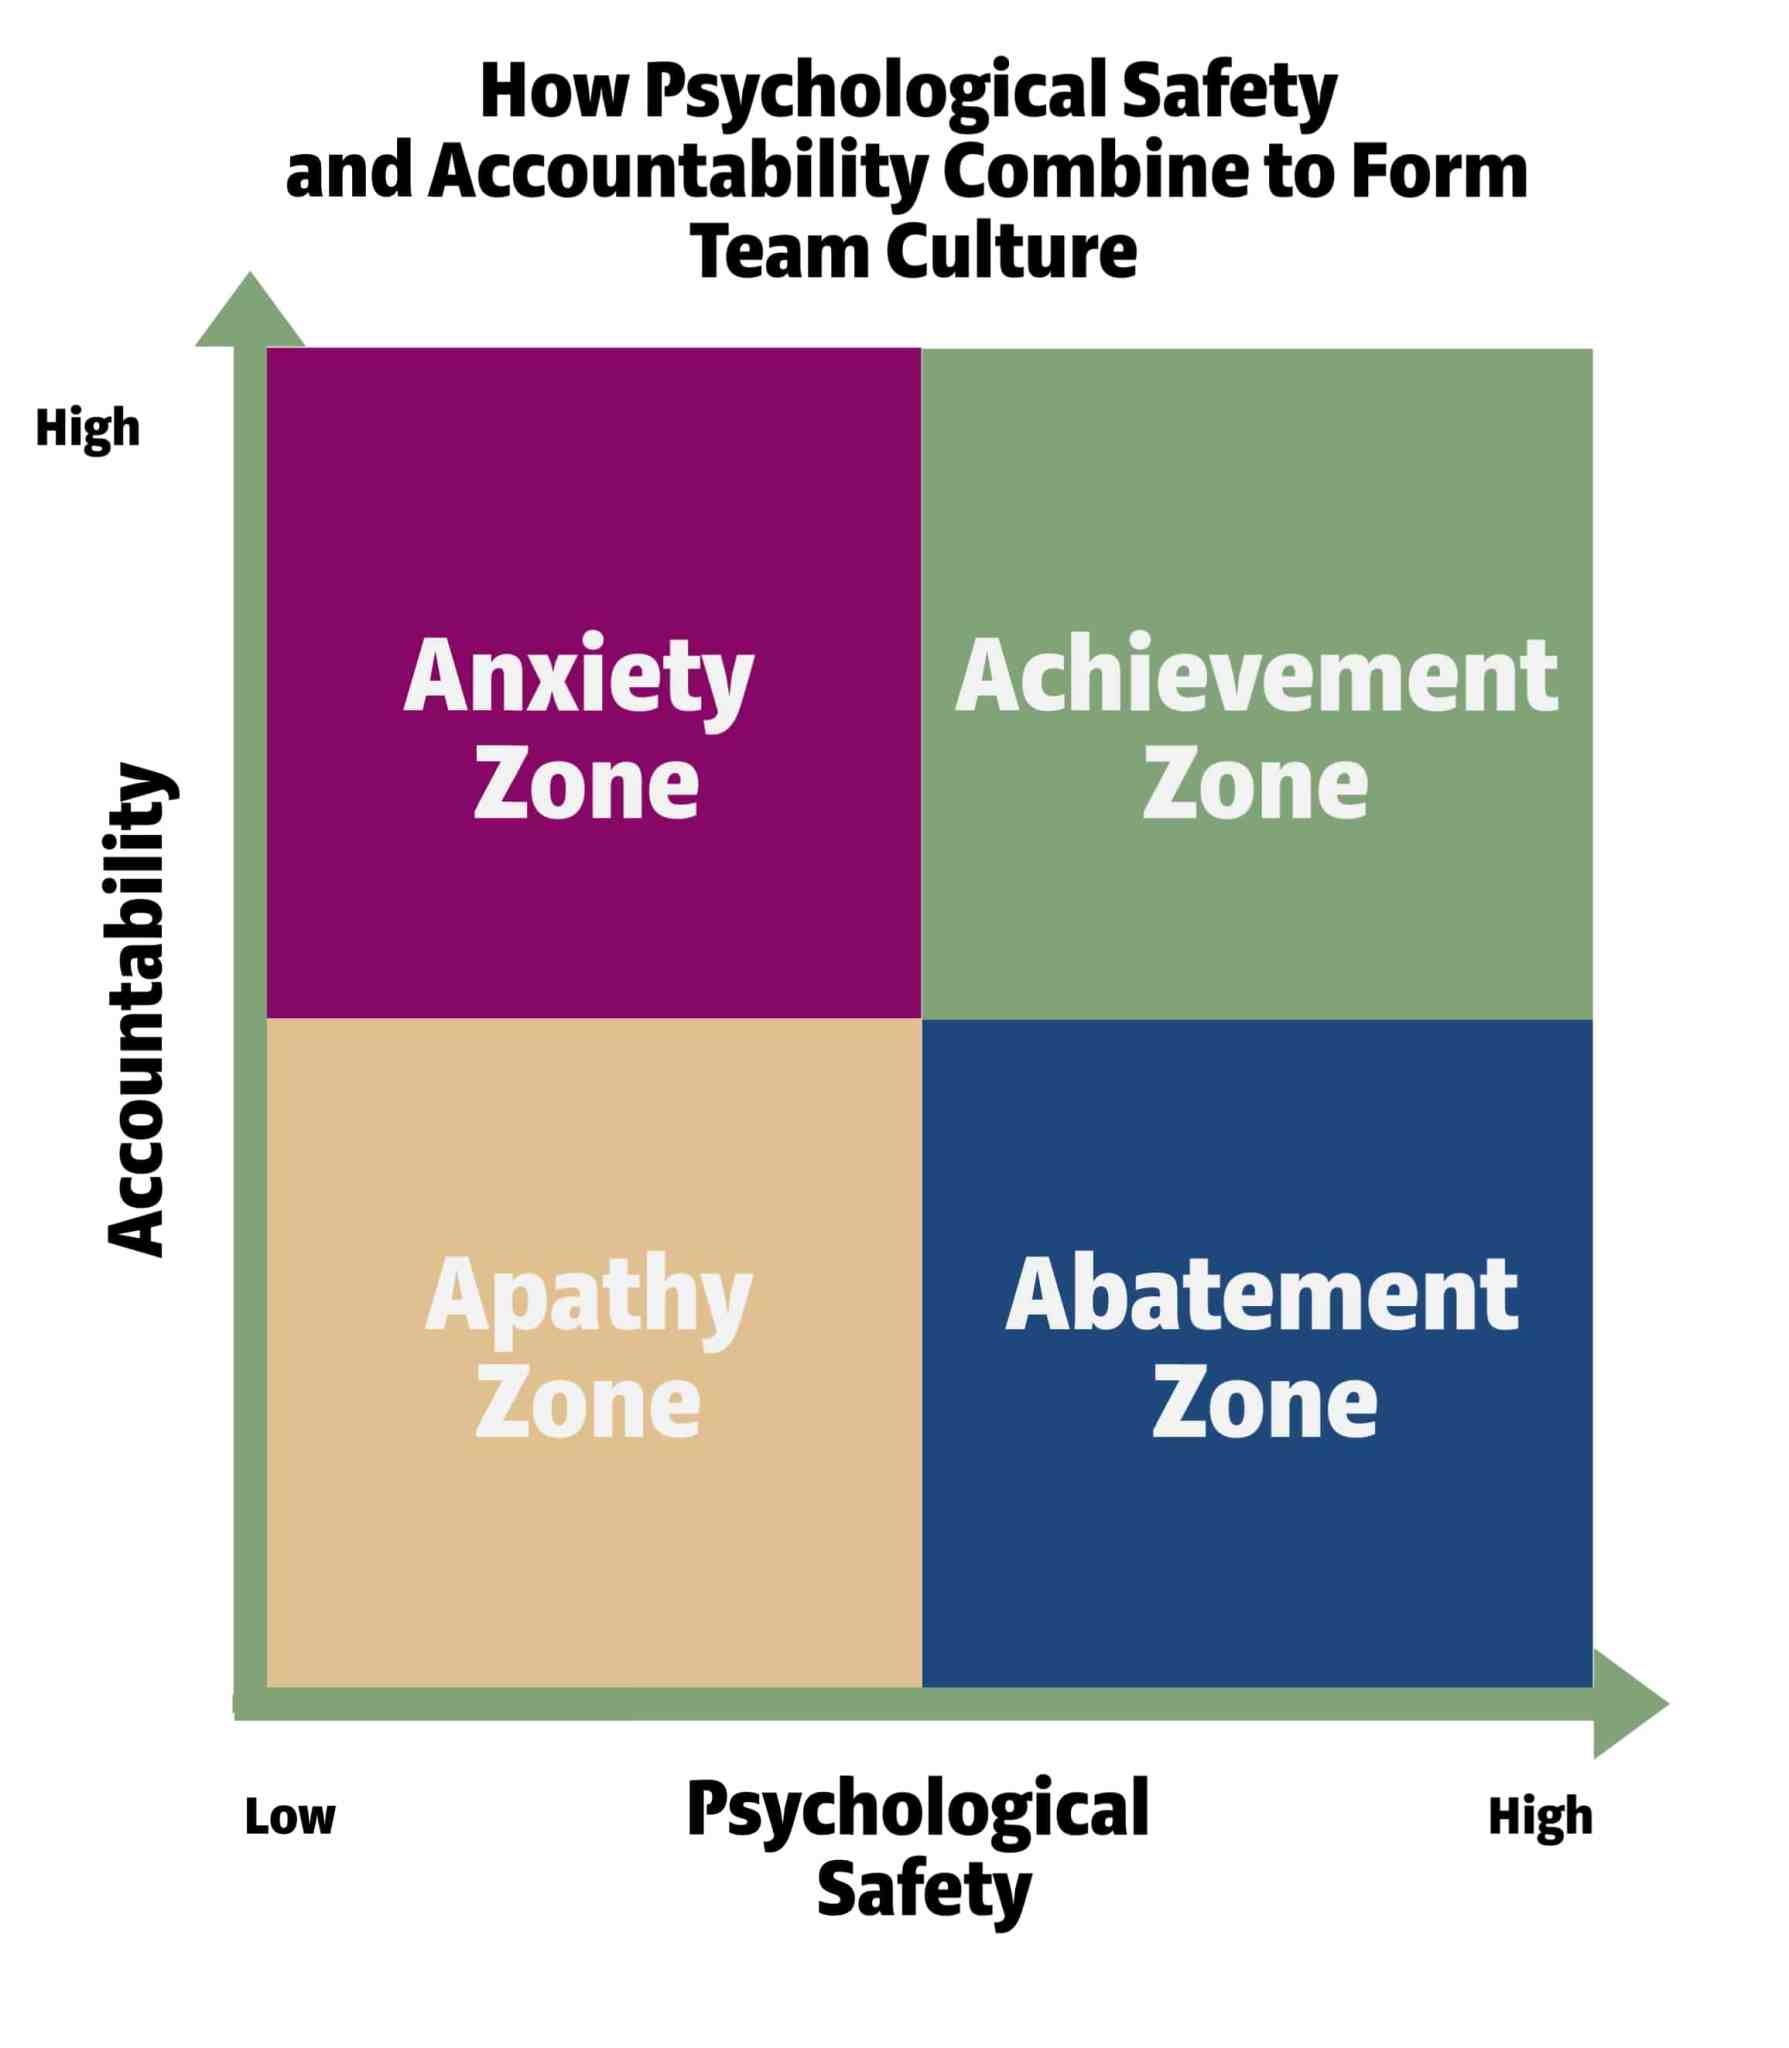 Psychological-Safety-and-Accountability-1-Oct-04-2020-11-53-19-97-PM